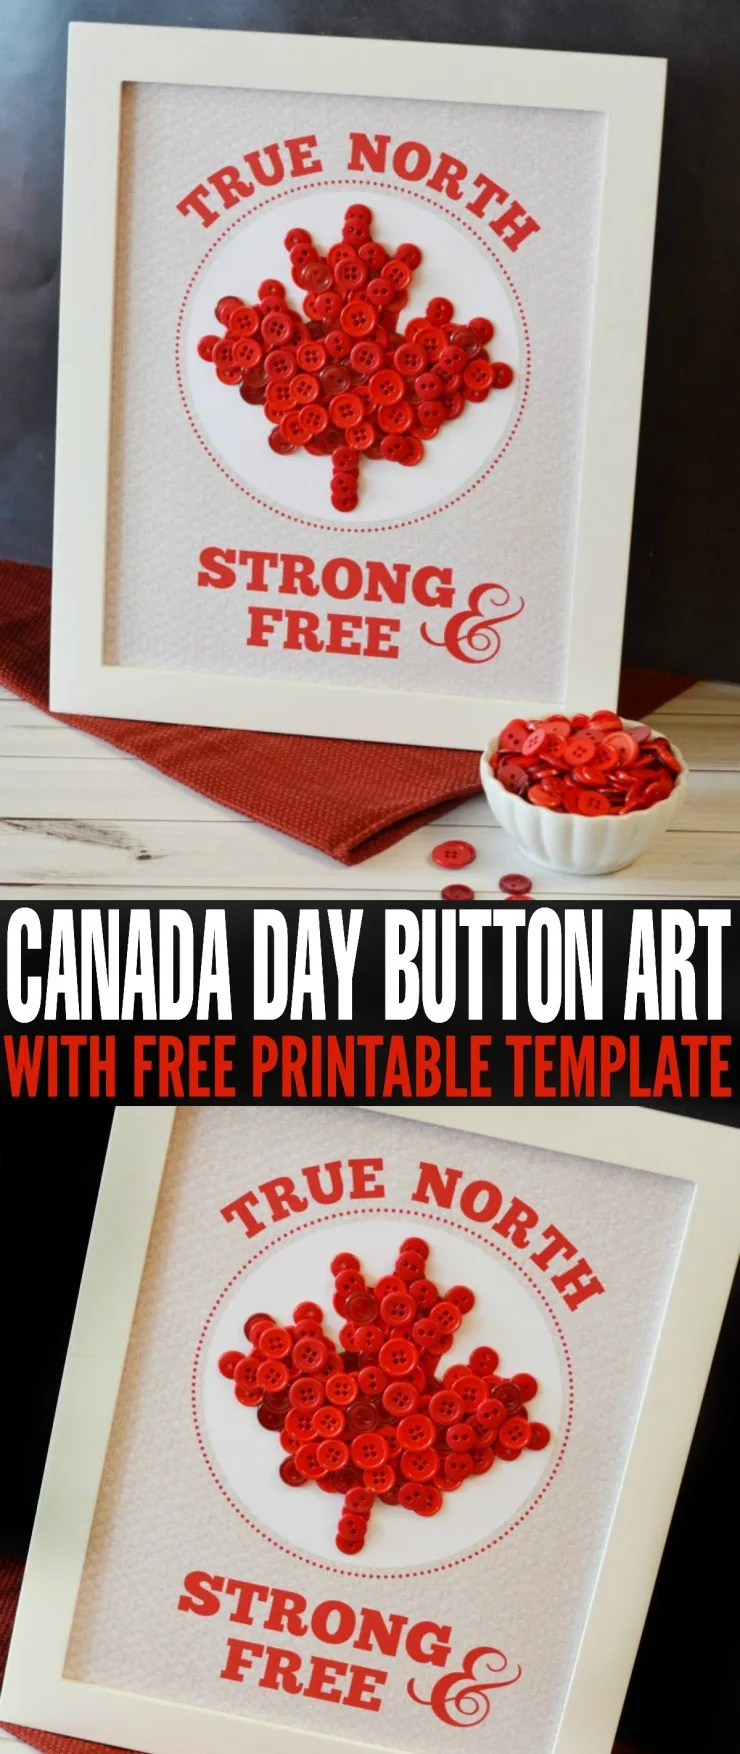 This True North Strong & Free Button Art with Free Printable Template project is the perfect Canada day craft for the whole family.